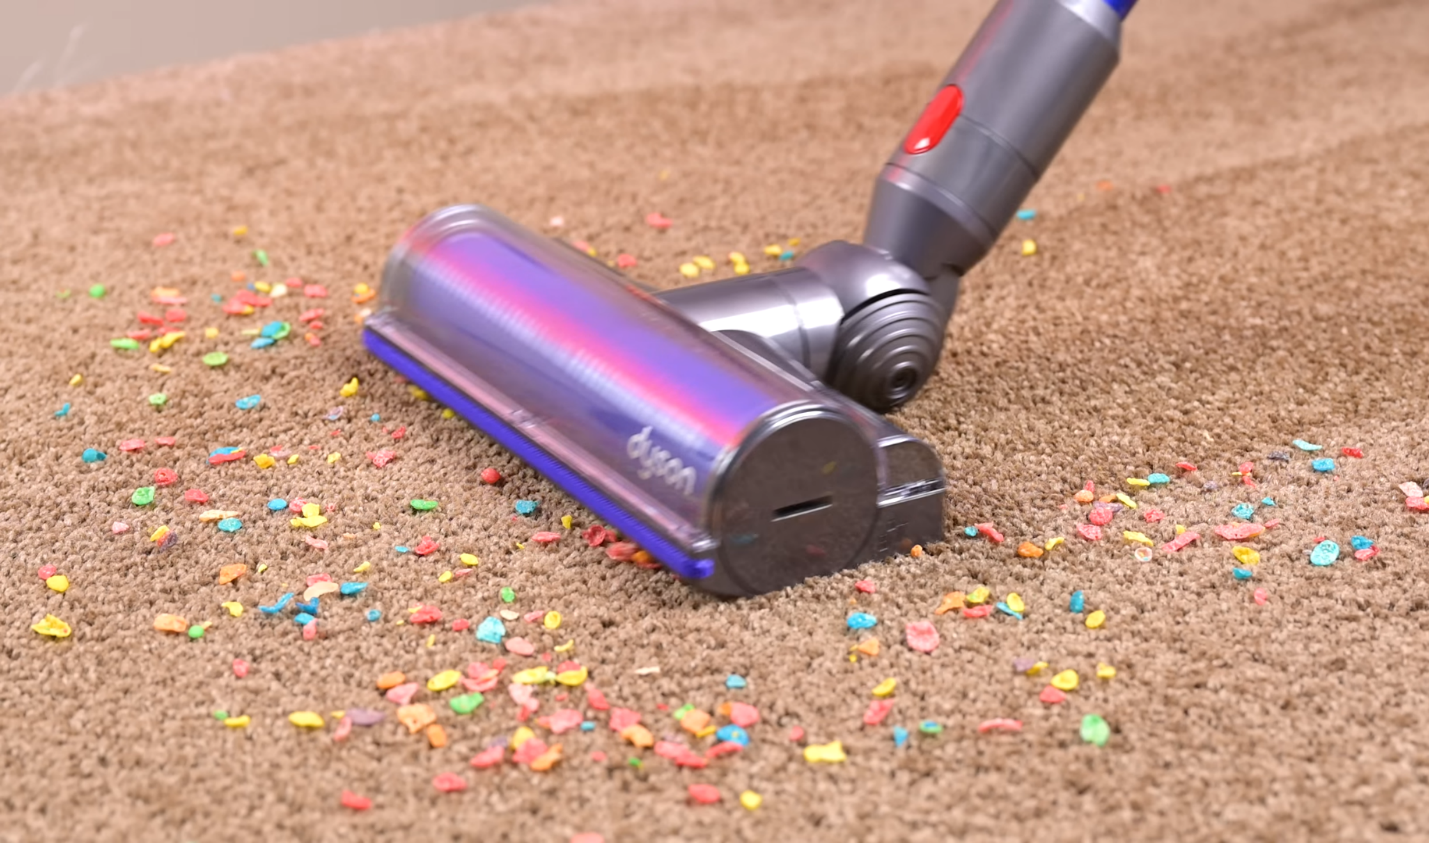 Dyson V11 vacuum in the process of cleaning up multicolored cereal pieces from a beige carpet